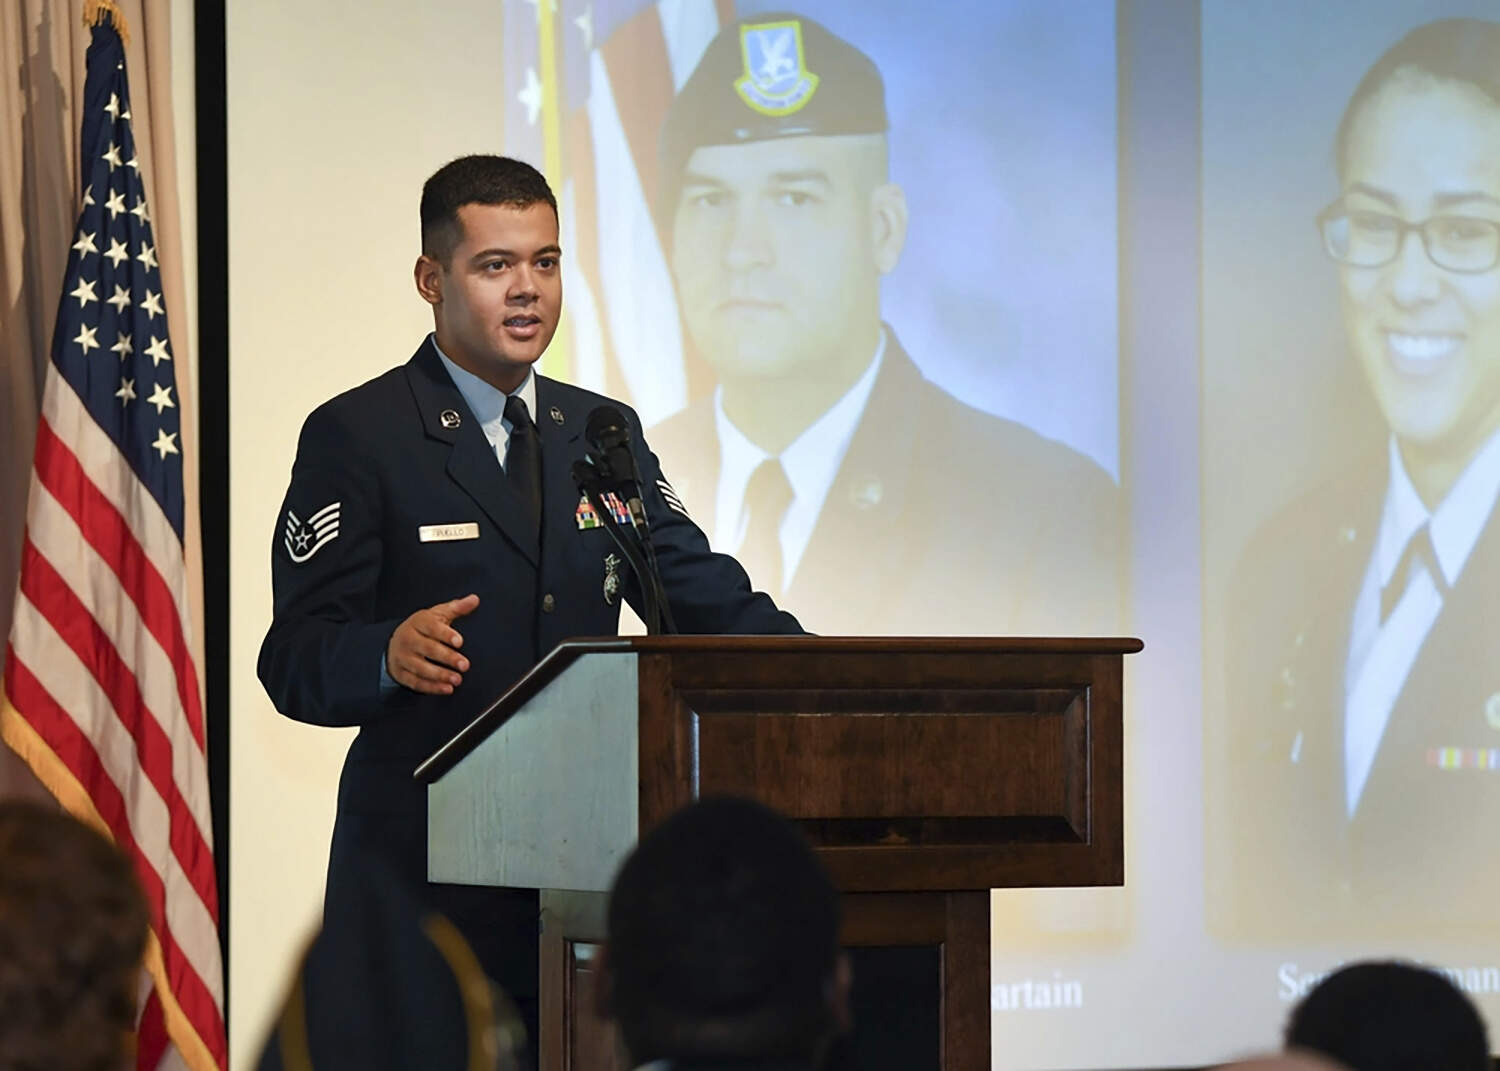 Wilmer Puello-Mota, a member of the U.S. Air Force, speaks during a gate dedication and renaming ceremony at Hanscom Air Force Base in Massachusetts, on Oct. 2, 2018. (Todd Maki/U.S. Air Force via AP)